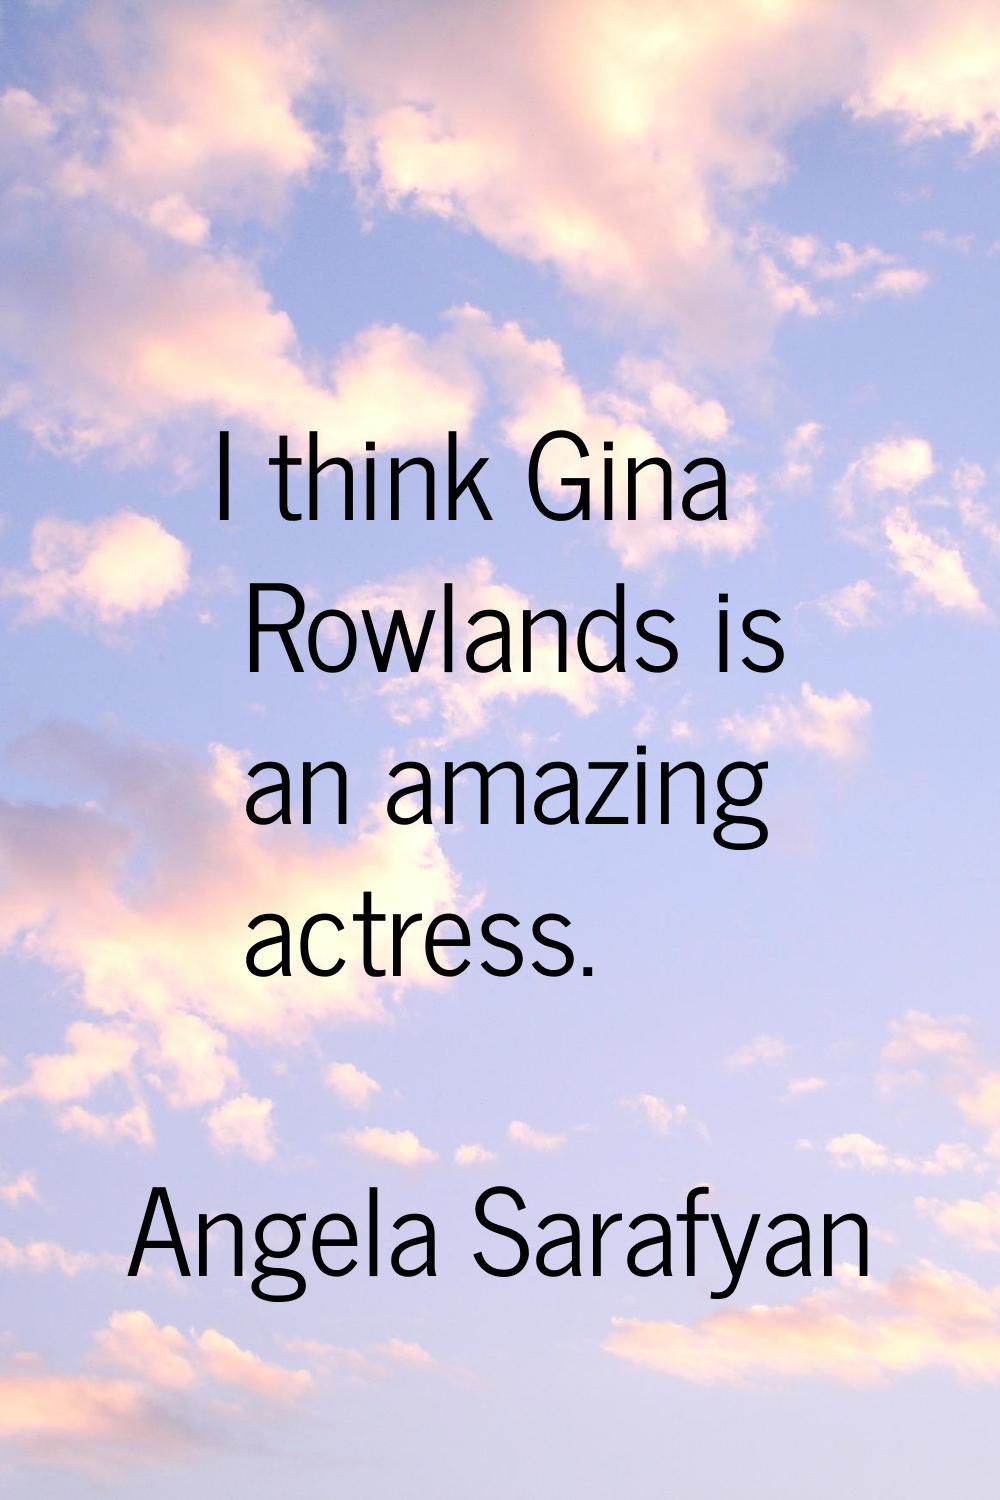 I think Gina Rowlands is an amazing actress.